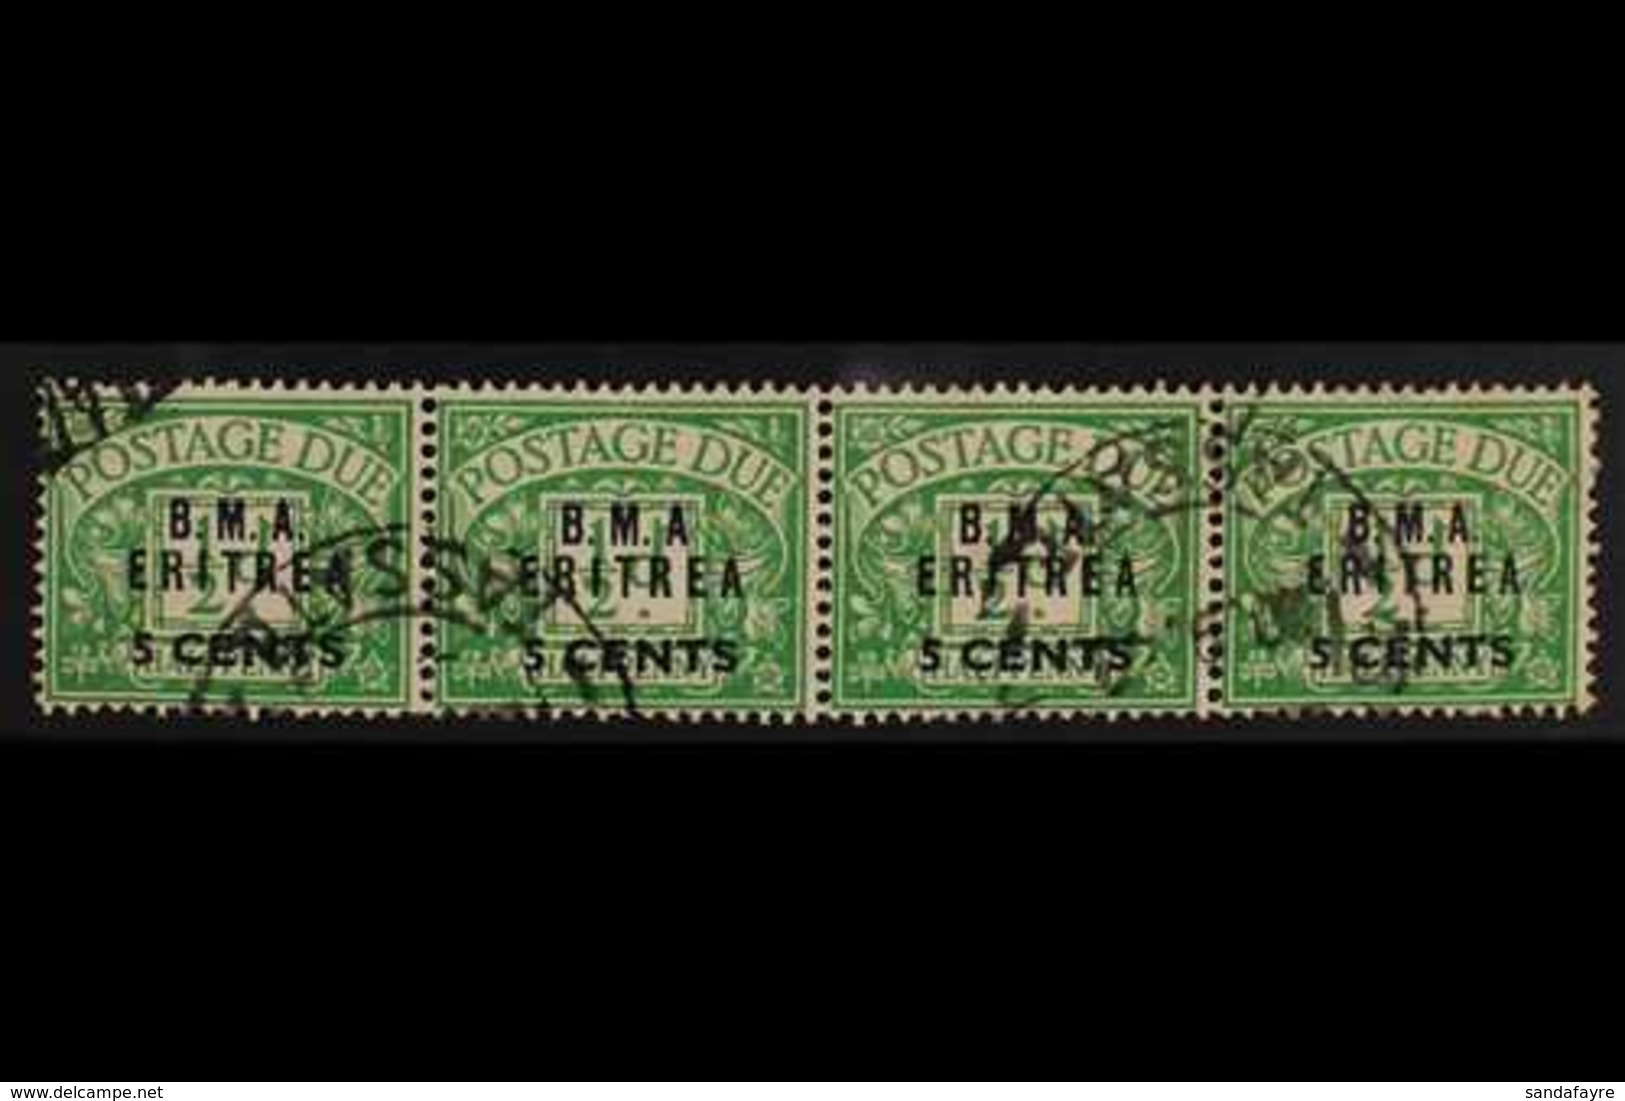 ERITREA 5c On ½d Emerald, BMA Ovpt, Variety "No Stop After A", SG ED1a In Strip With 3 Normals, Very Fine Used. For More - Italienisch Ost-Afrika